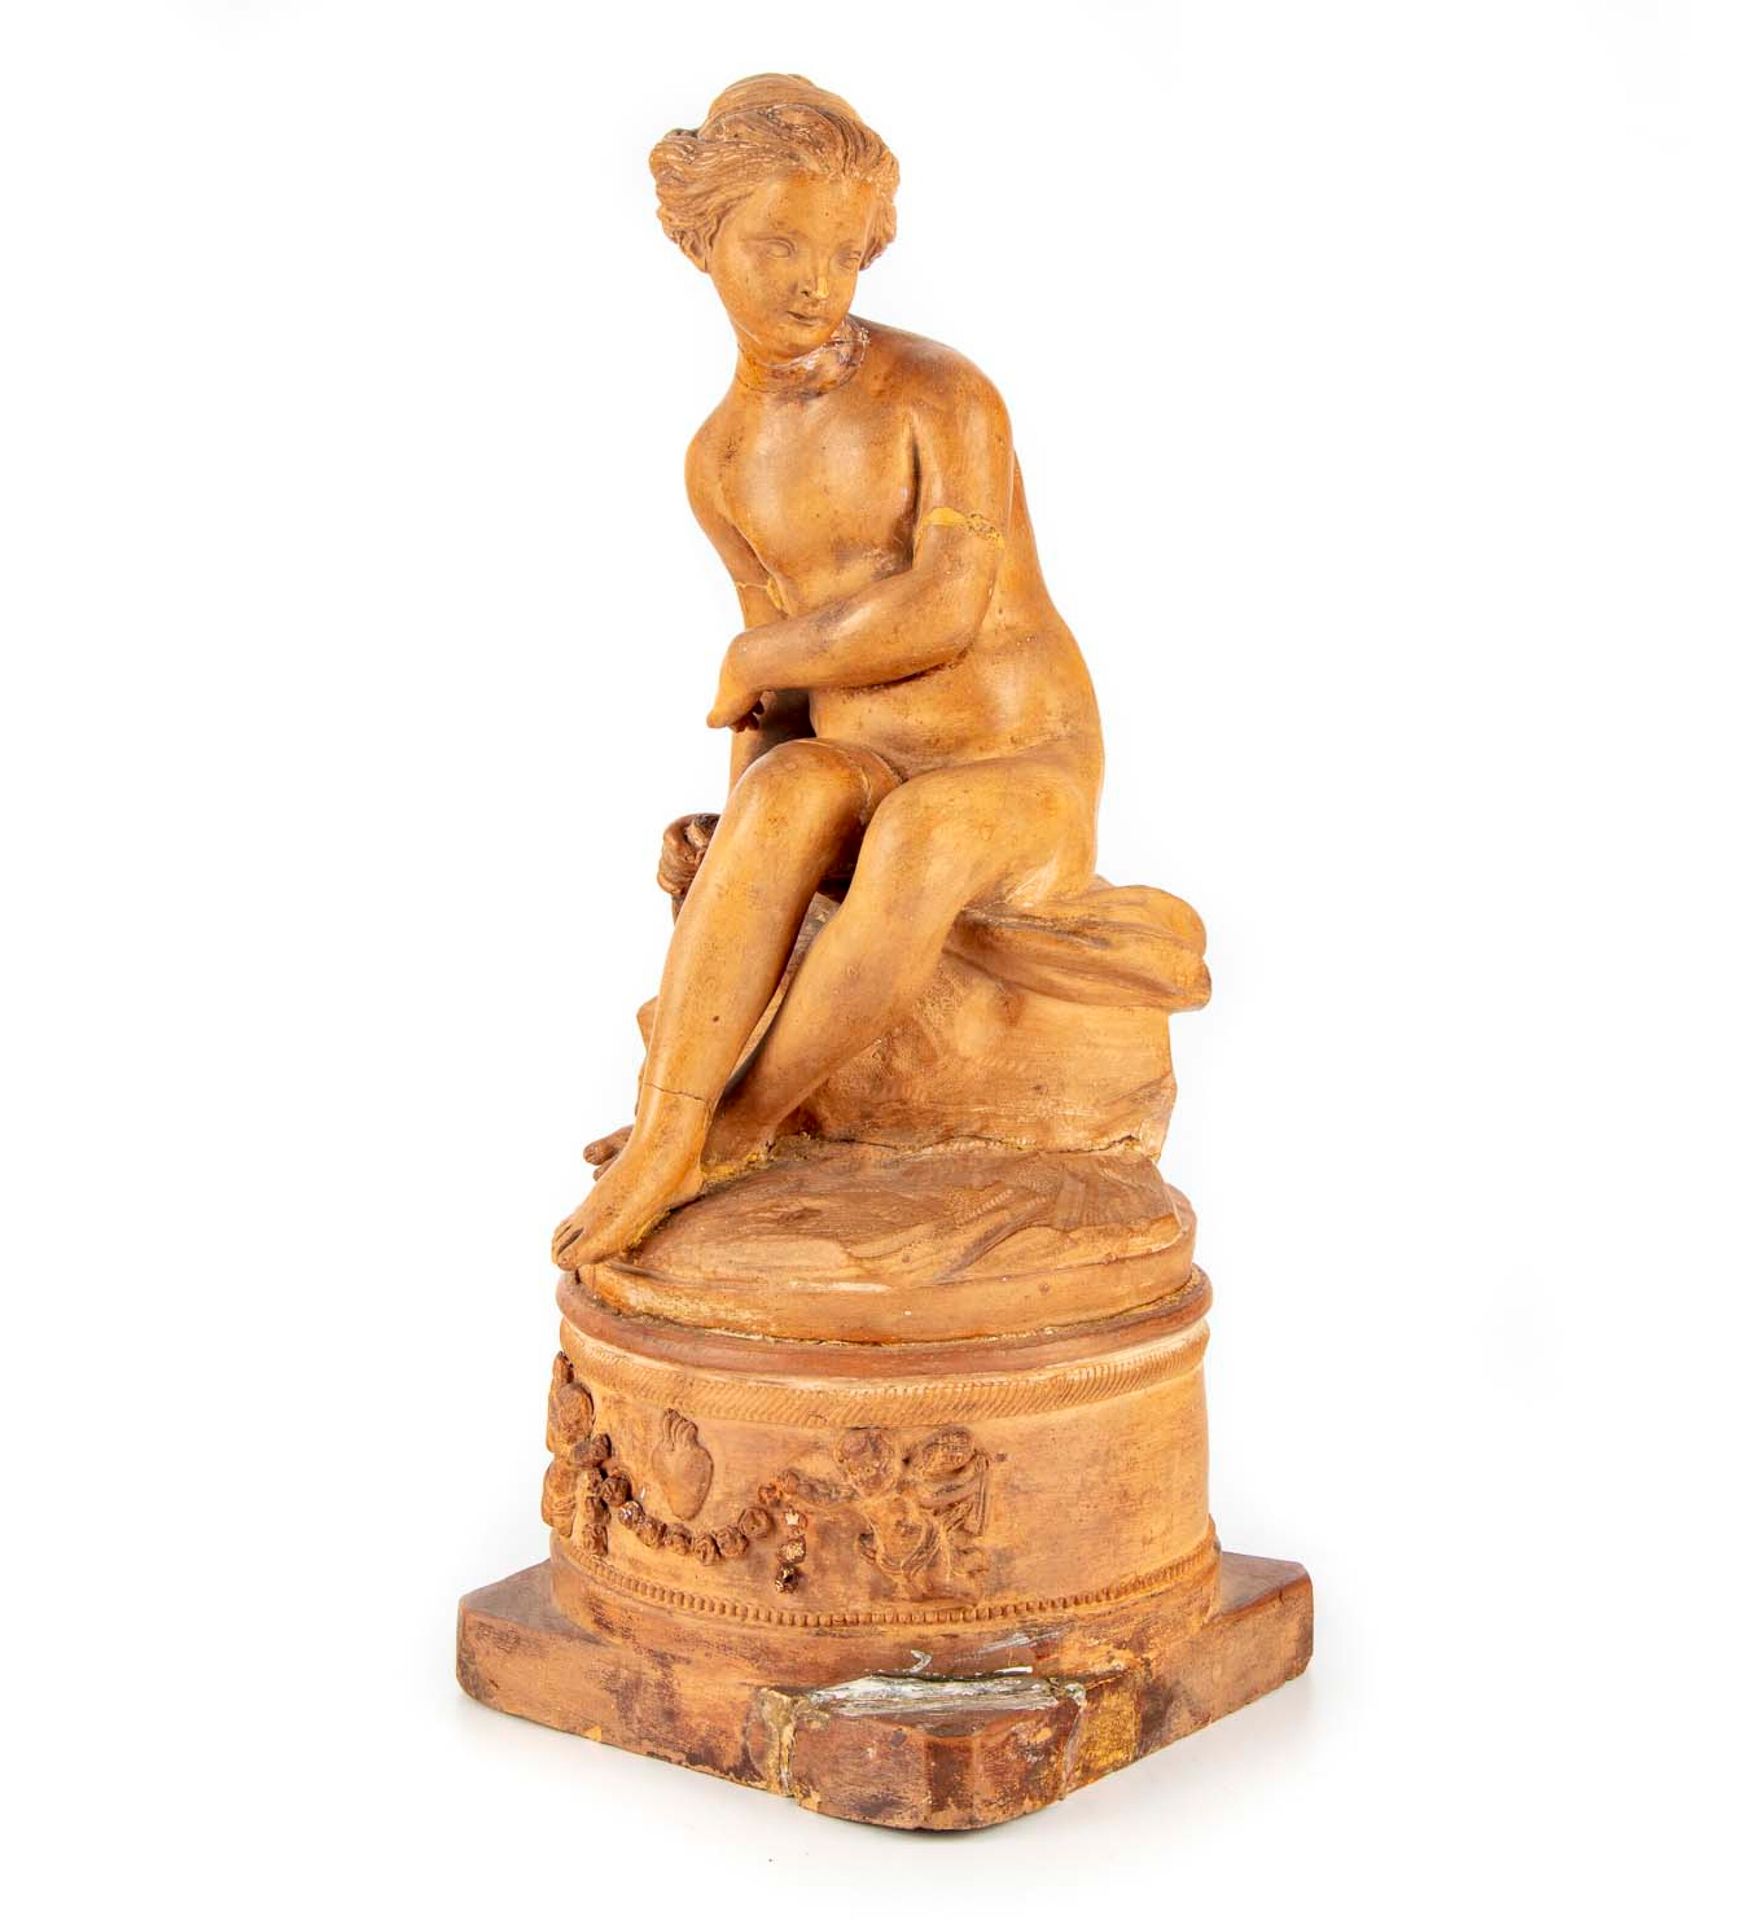 PAJOU After PAJOU - 19th century

Nymph with bath

Terra cotta with patina

Base&hellip;